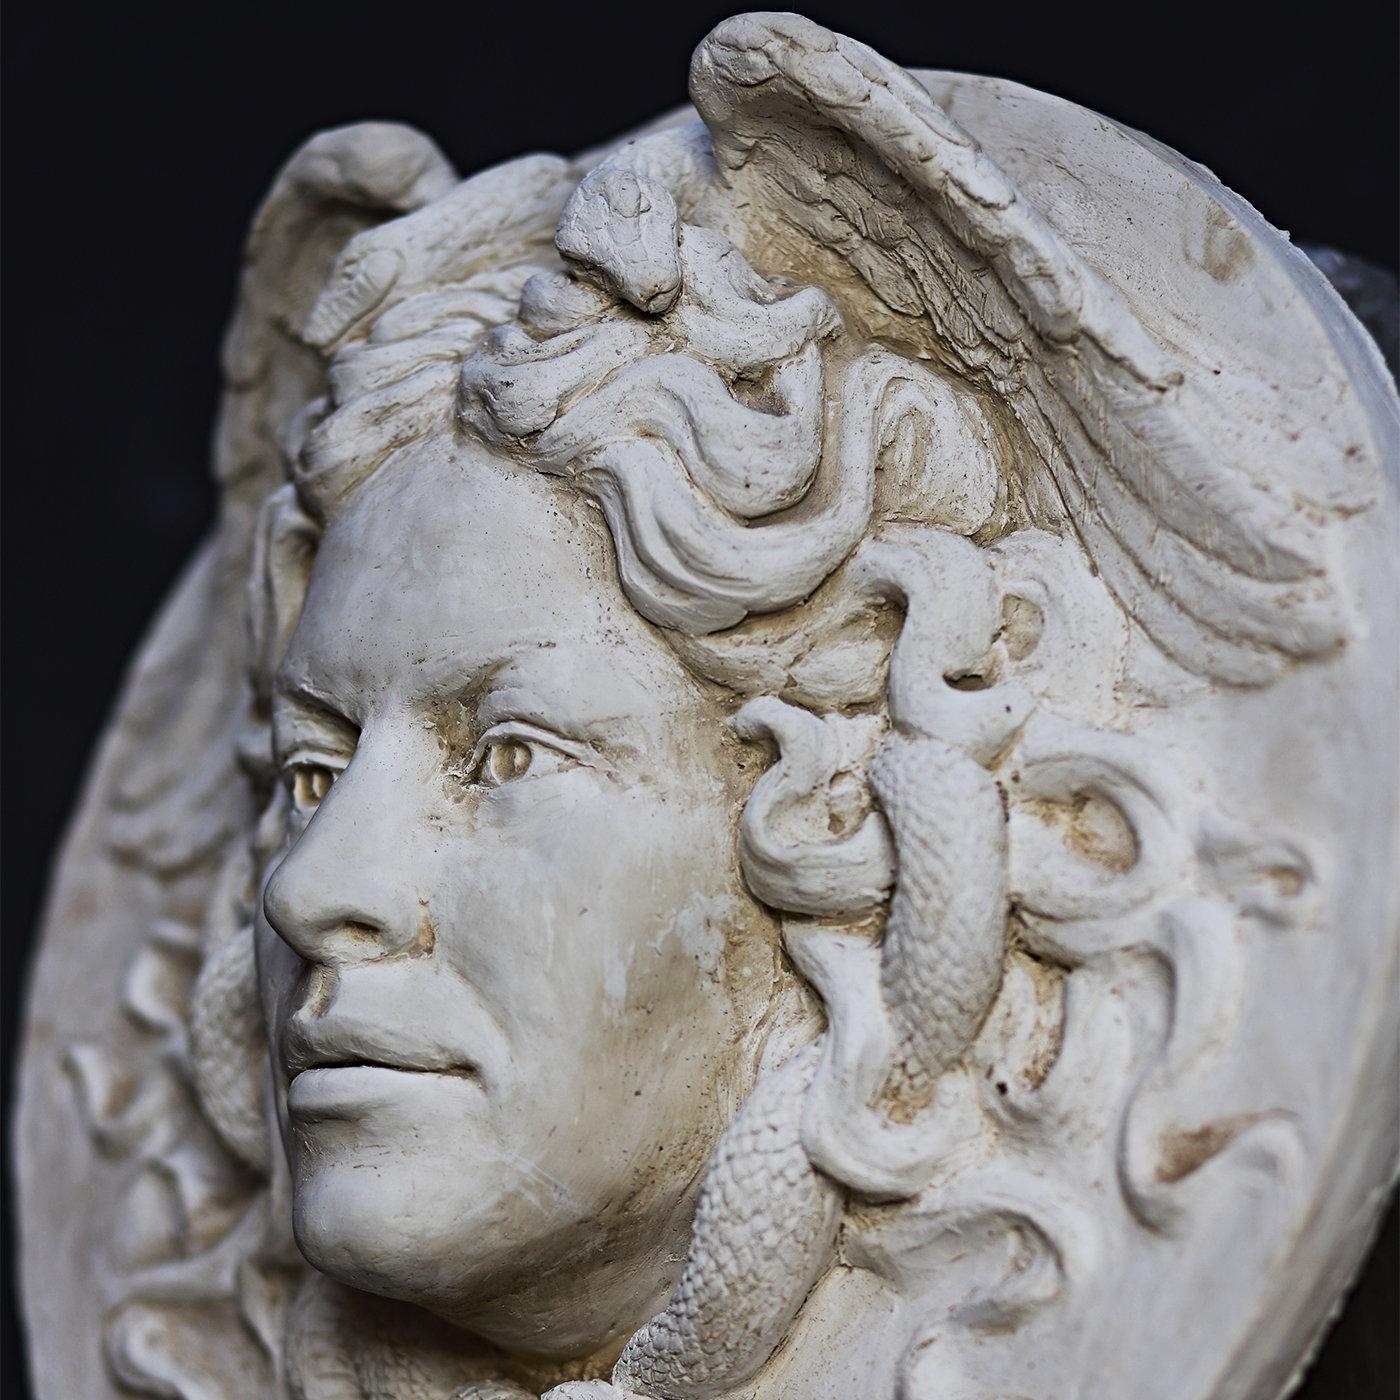 An extraordinary work of art by Romanelli sculptors, this low relief is inspired by the celebrated Medusa Rondanini, a Hellenistic marble copy of the head of the goddess Medusa. Absolutely stunning in its perfect, archetypal features, the